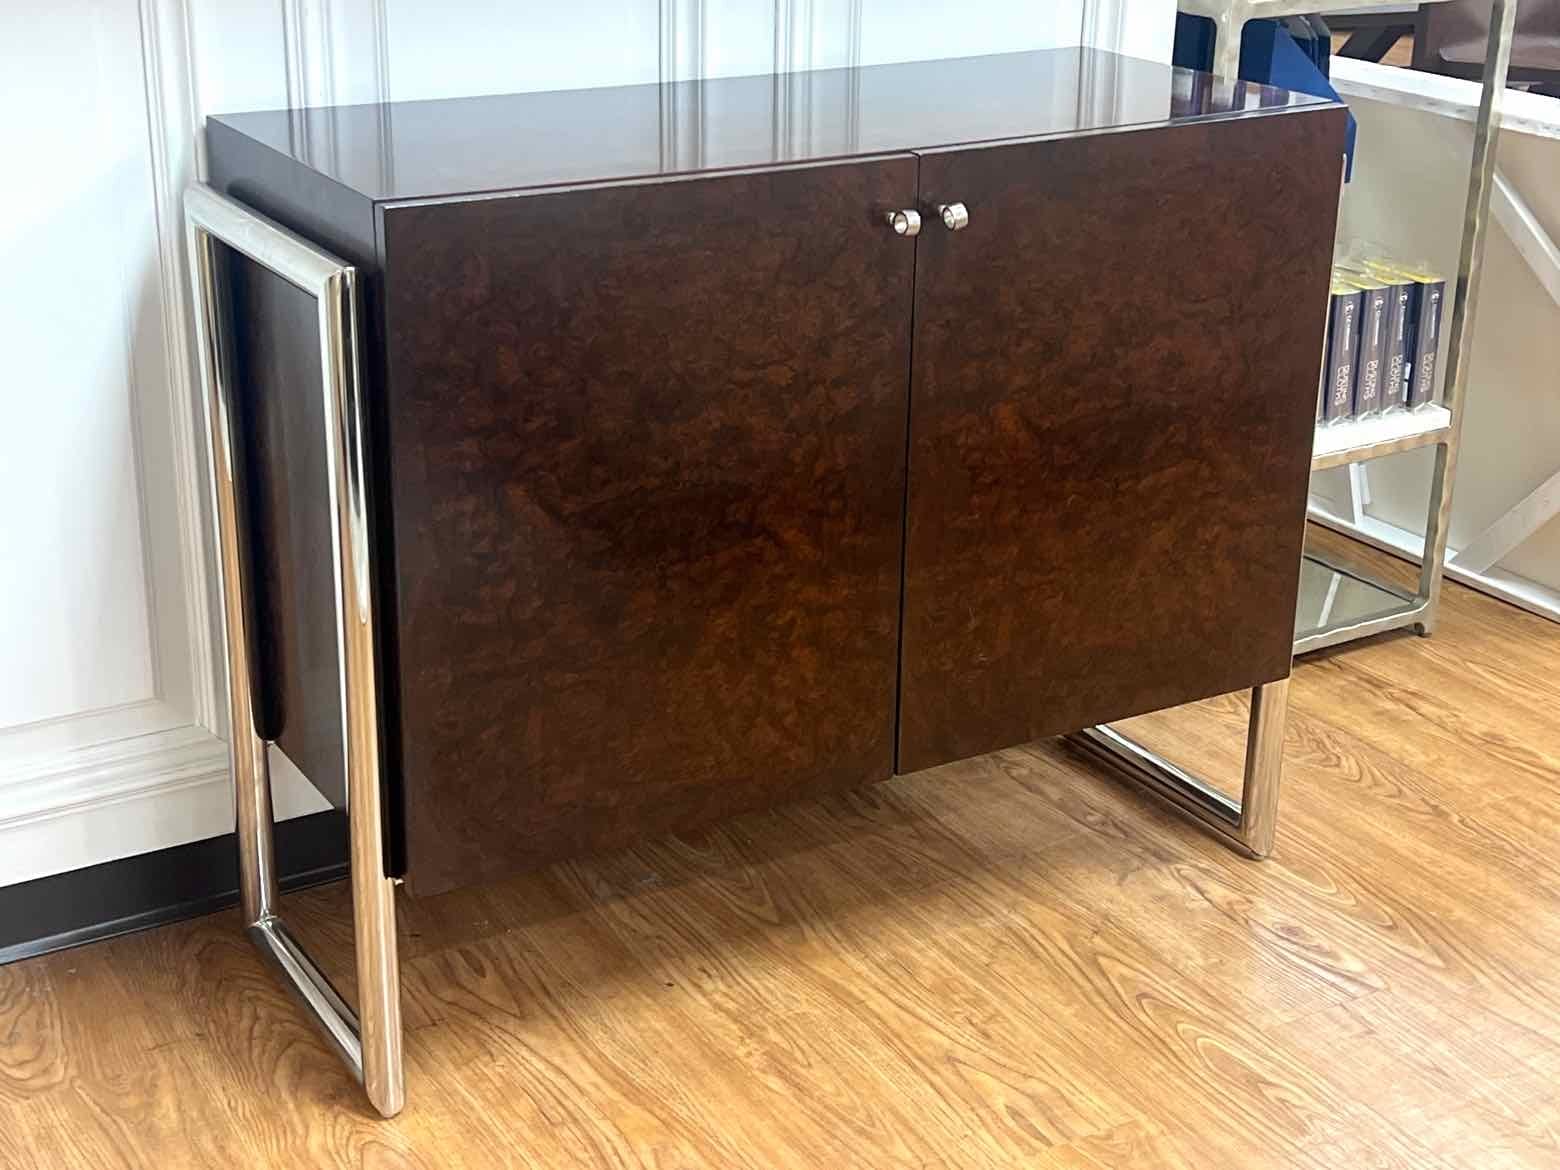  MG+BW Espresso Cabinet with Chrome Legs 